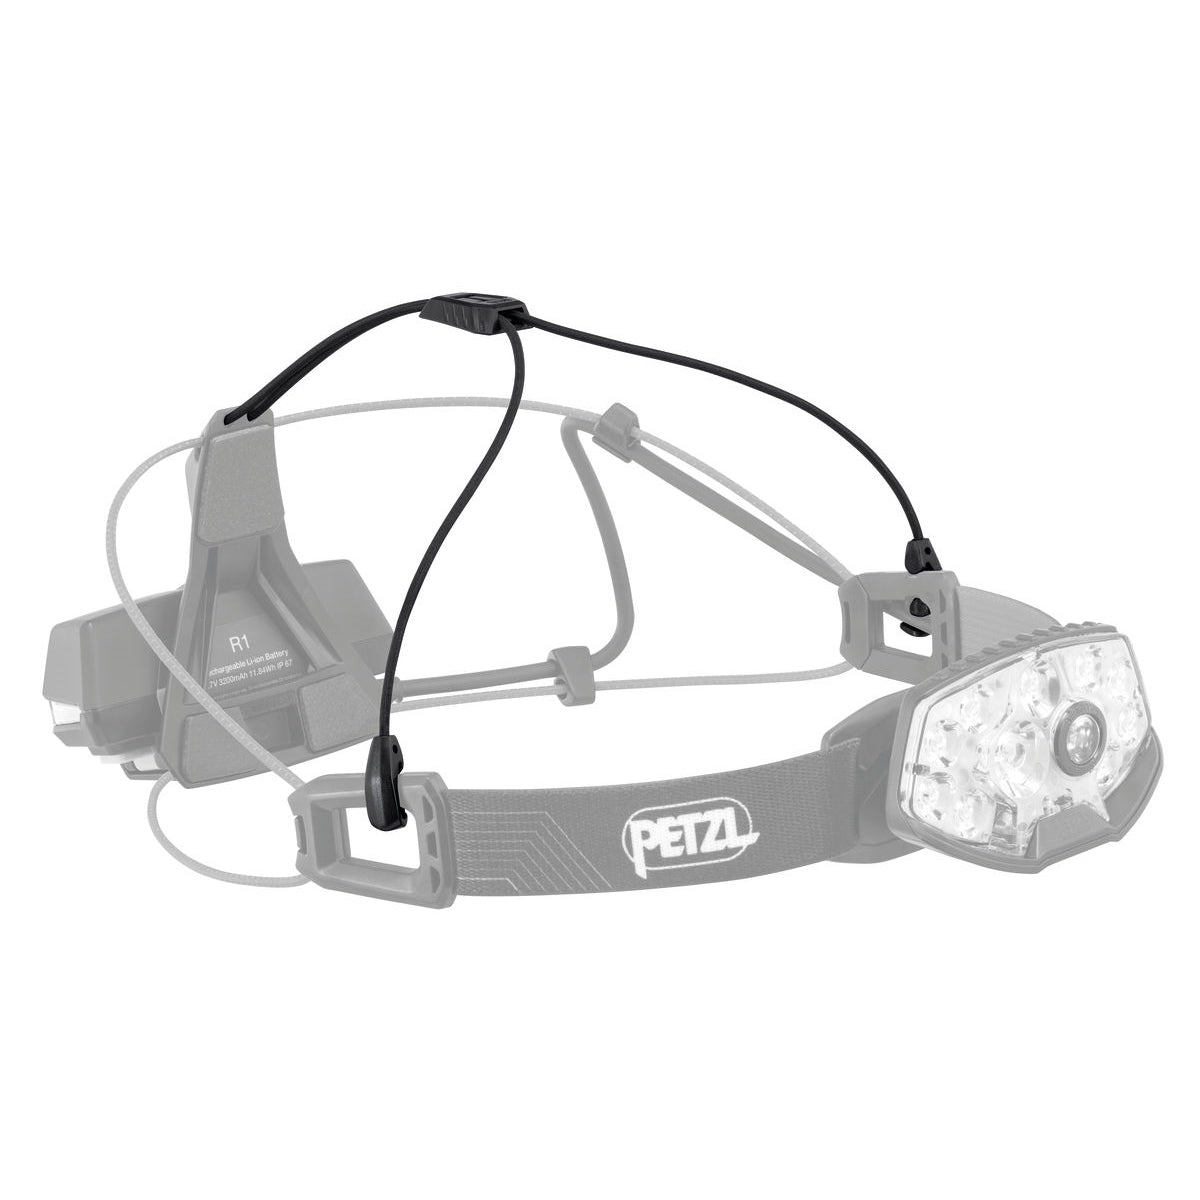 Lampe frontale petzl rechargeable